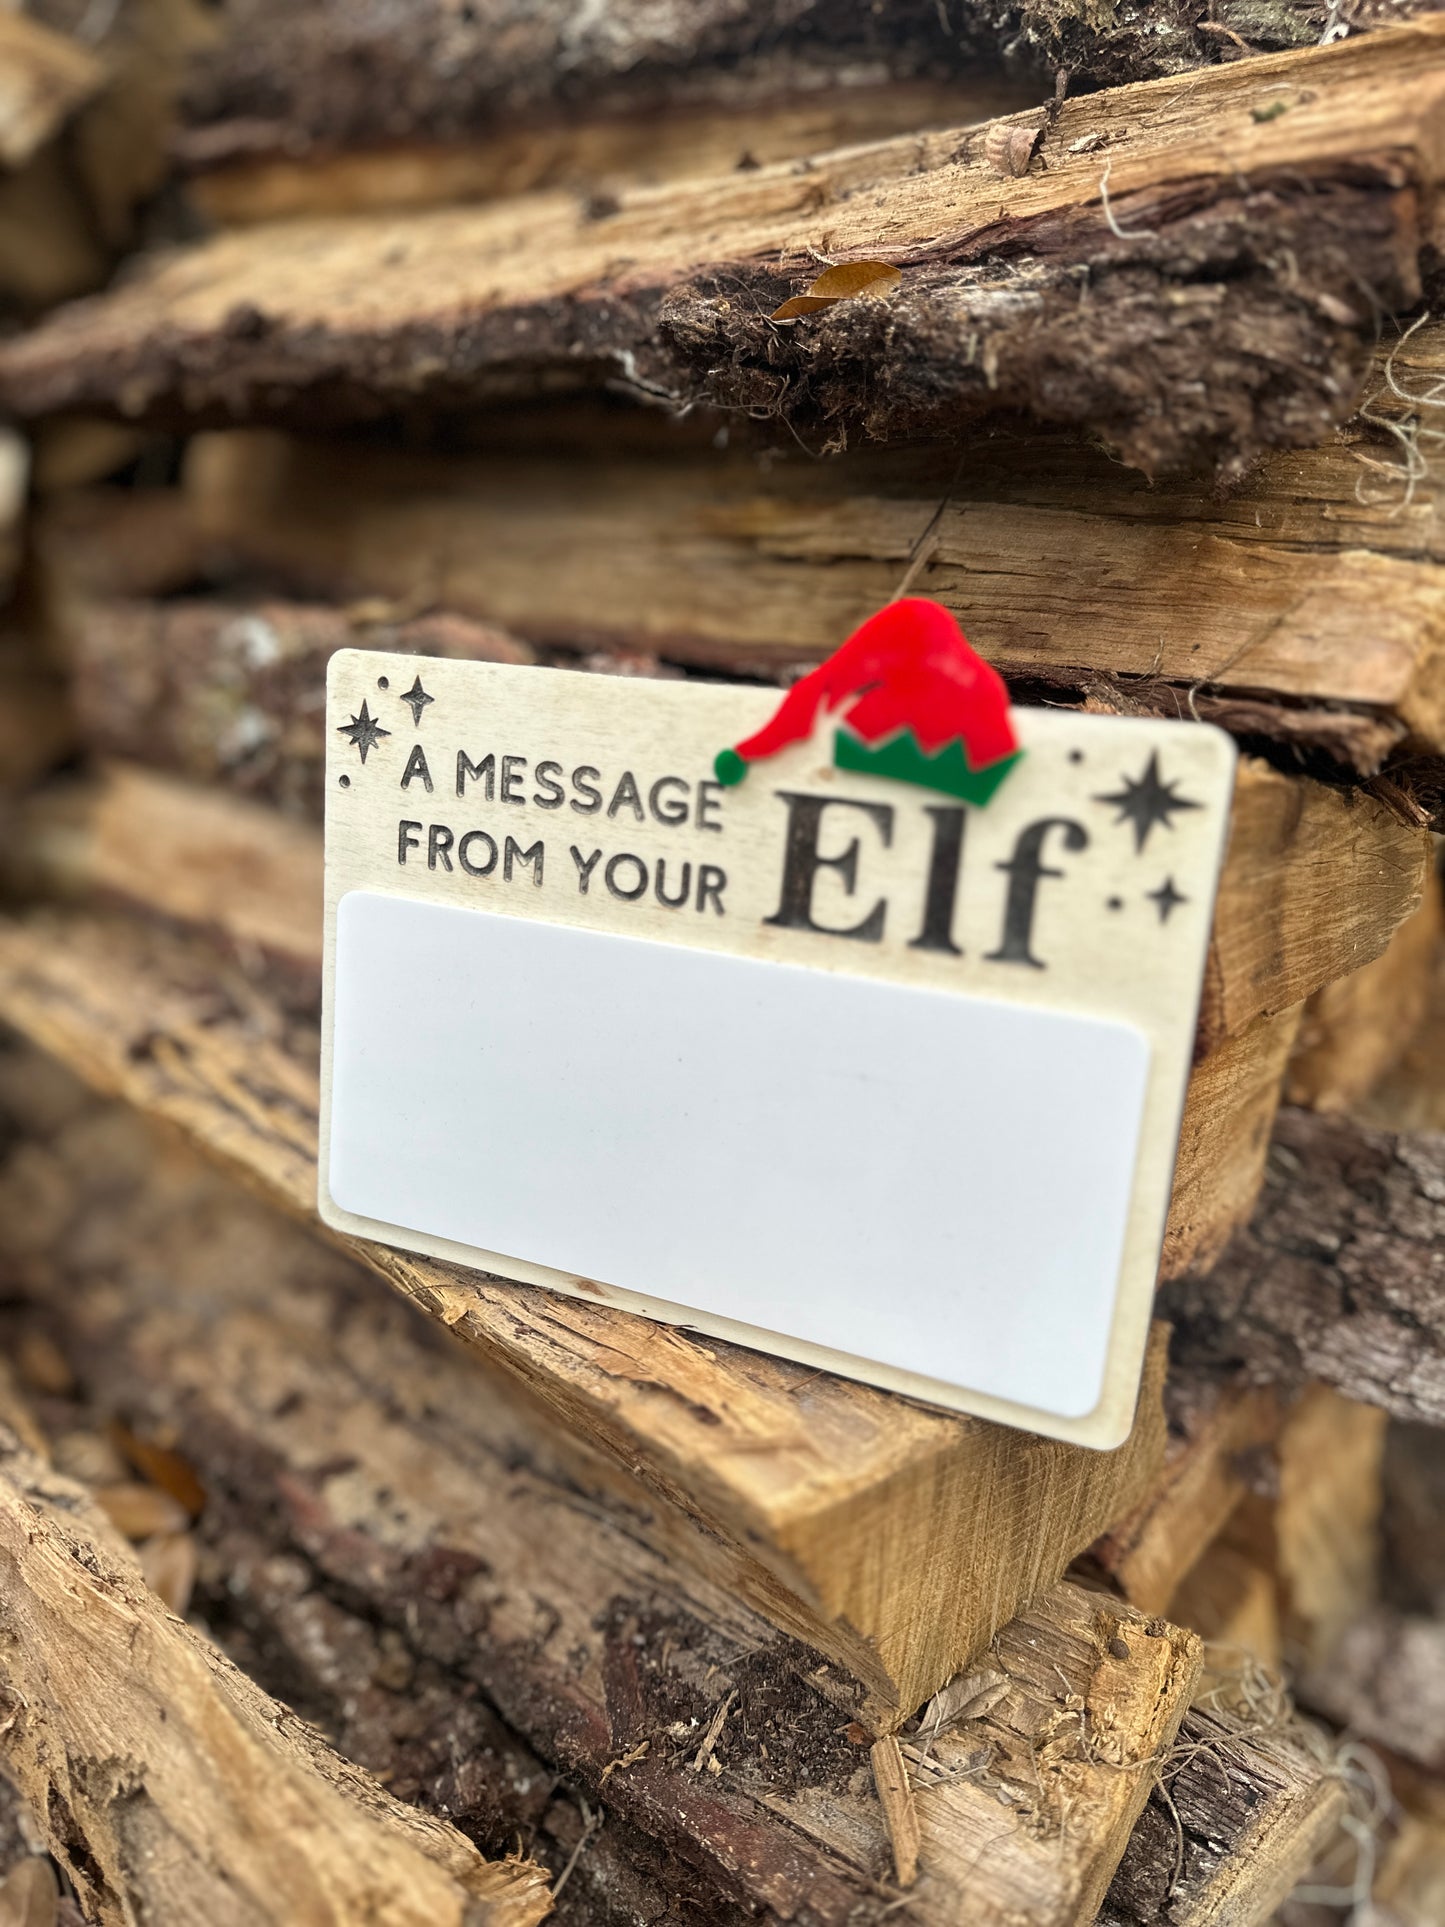 message from your elf message board